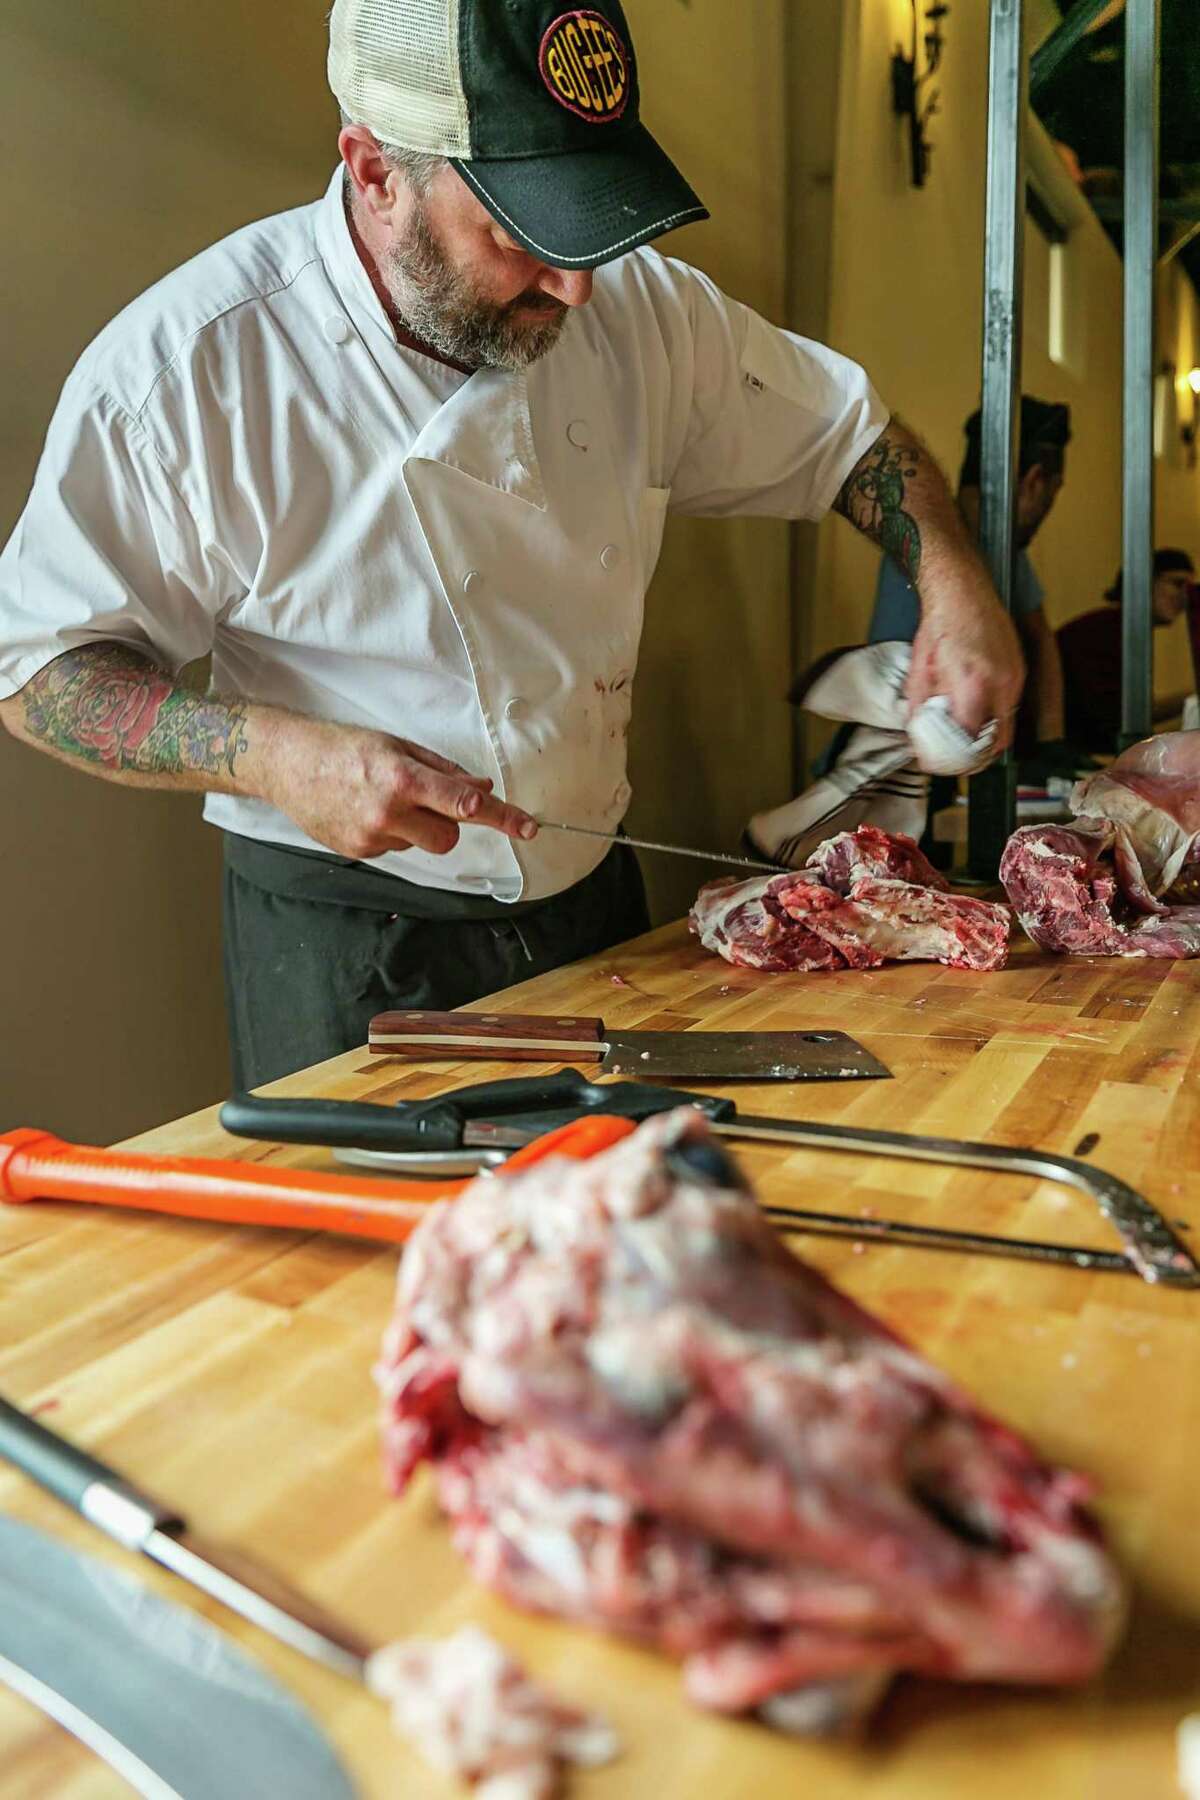 The fourth annual Butcher's Ball, showcasing ethical and sustainable ranching and farming in Texas, will be held Oct. 20, 2019 in Brenham. Shown: Chef Richard Knight carving.